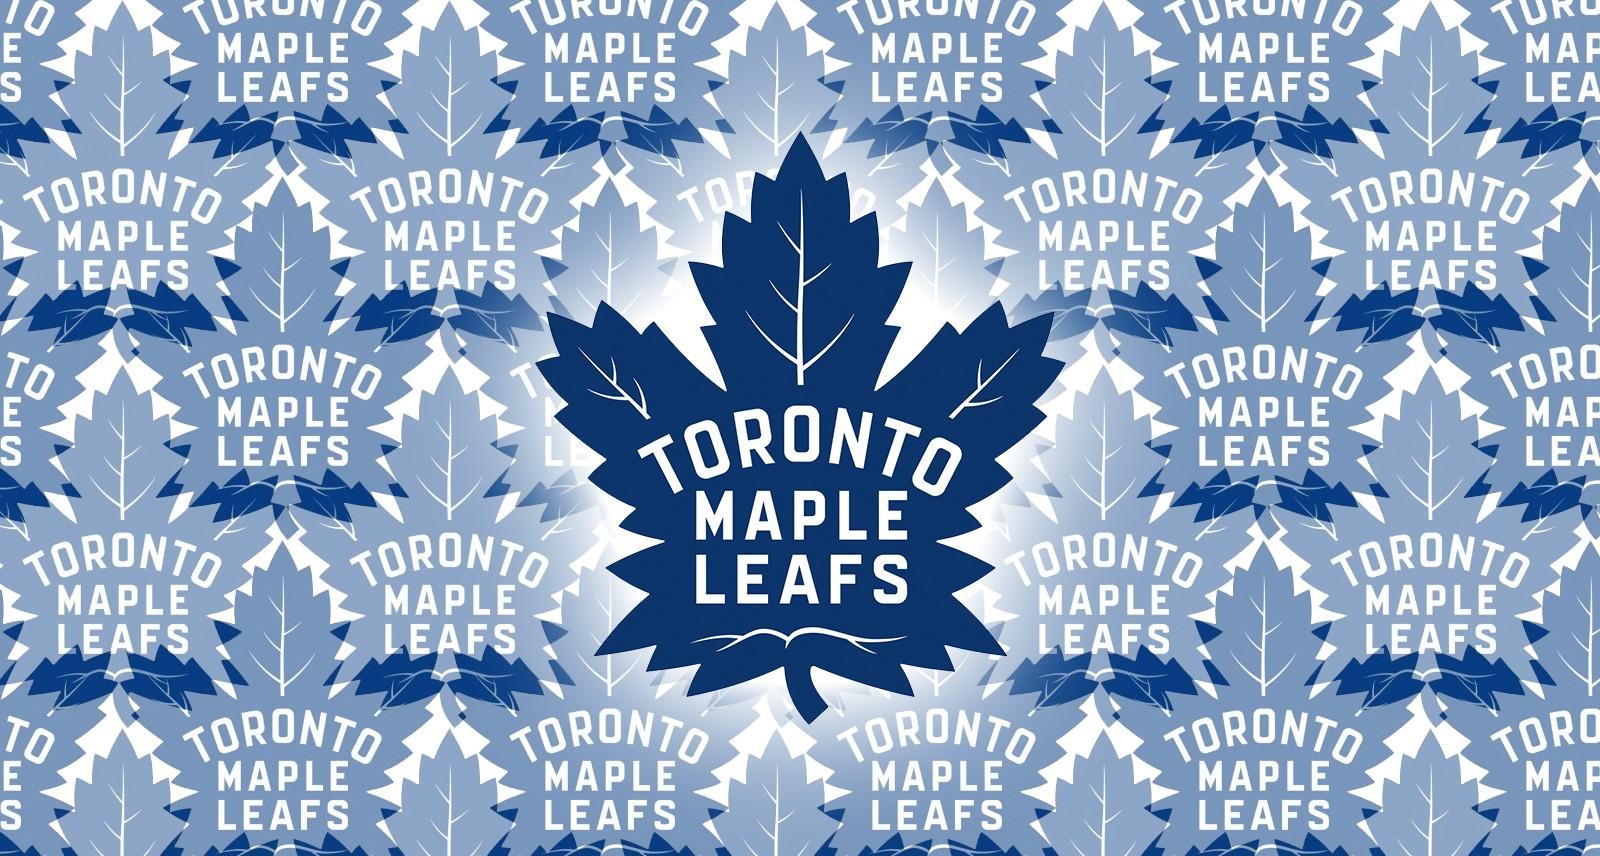 New Toronto Maple Leafs Logo - Here's Your First Look at the New Toronto Maple Leafs Logo | Sharp ...